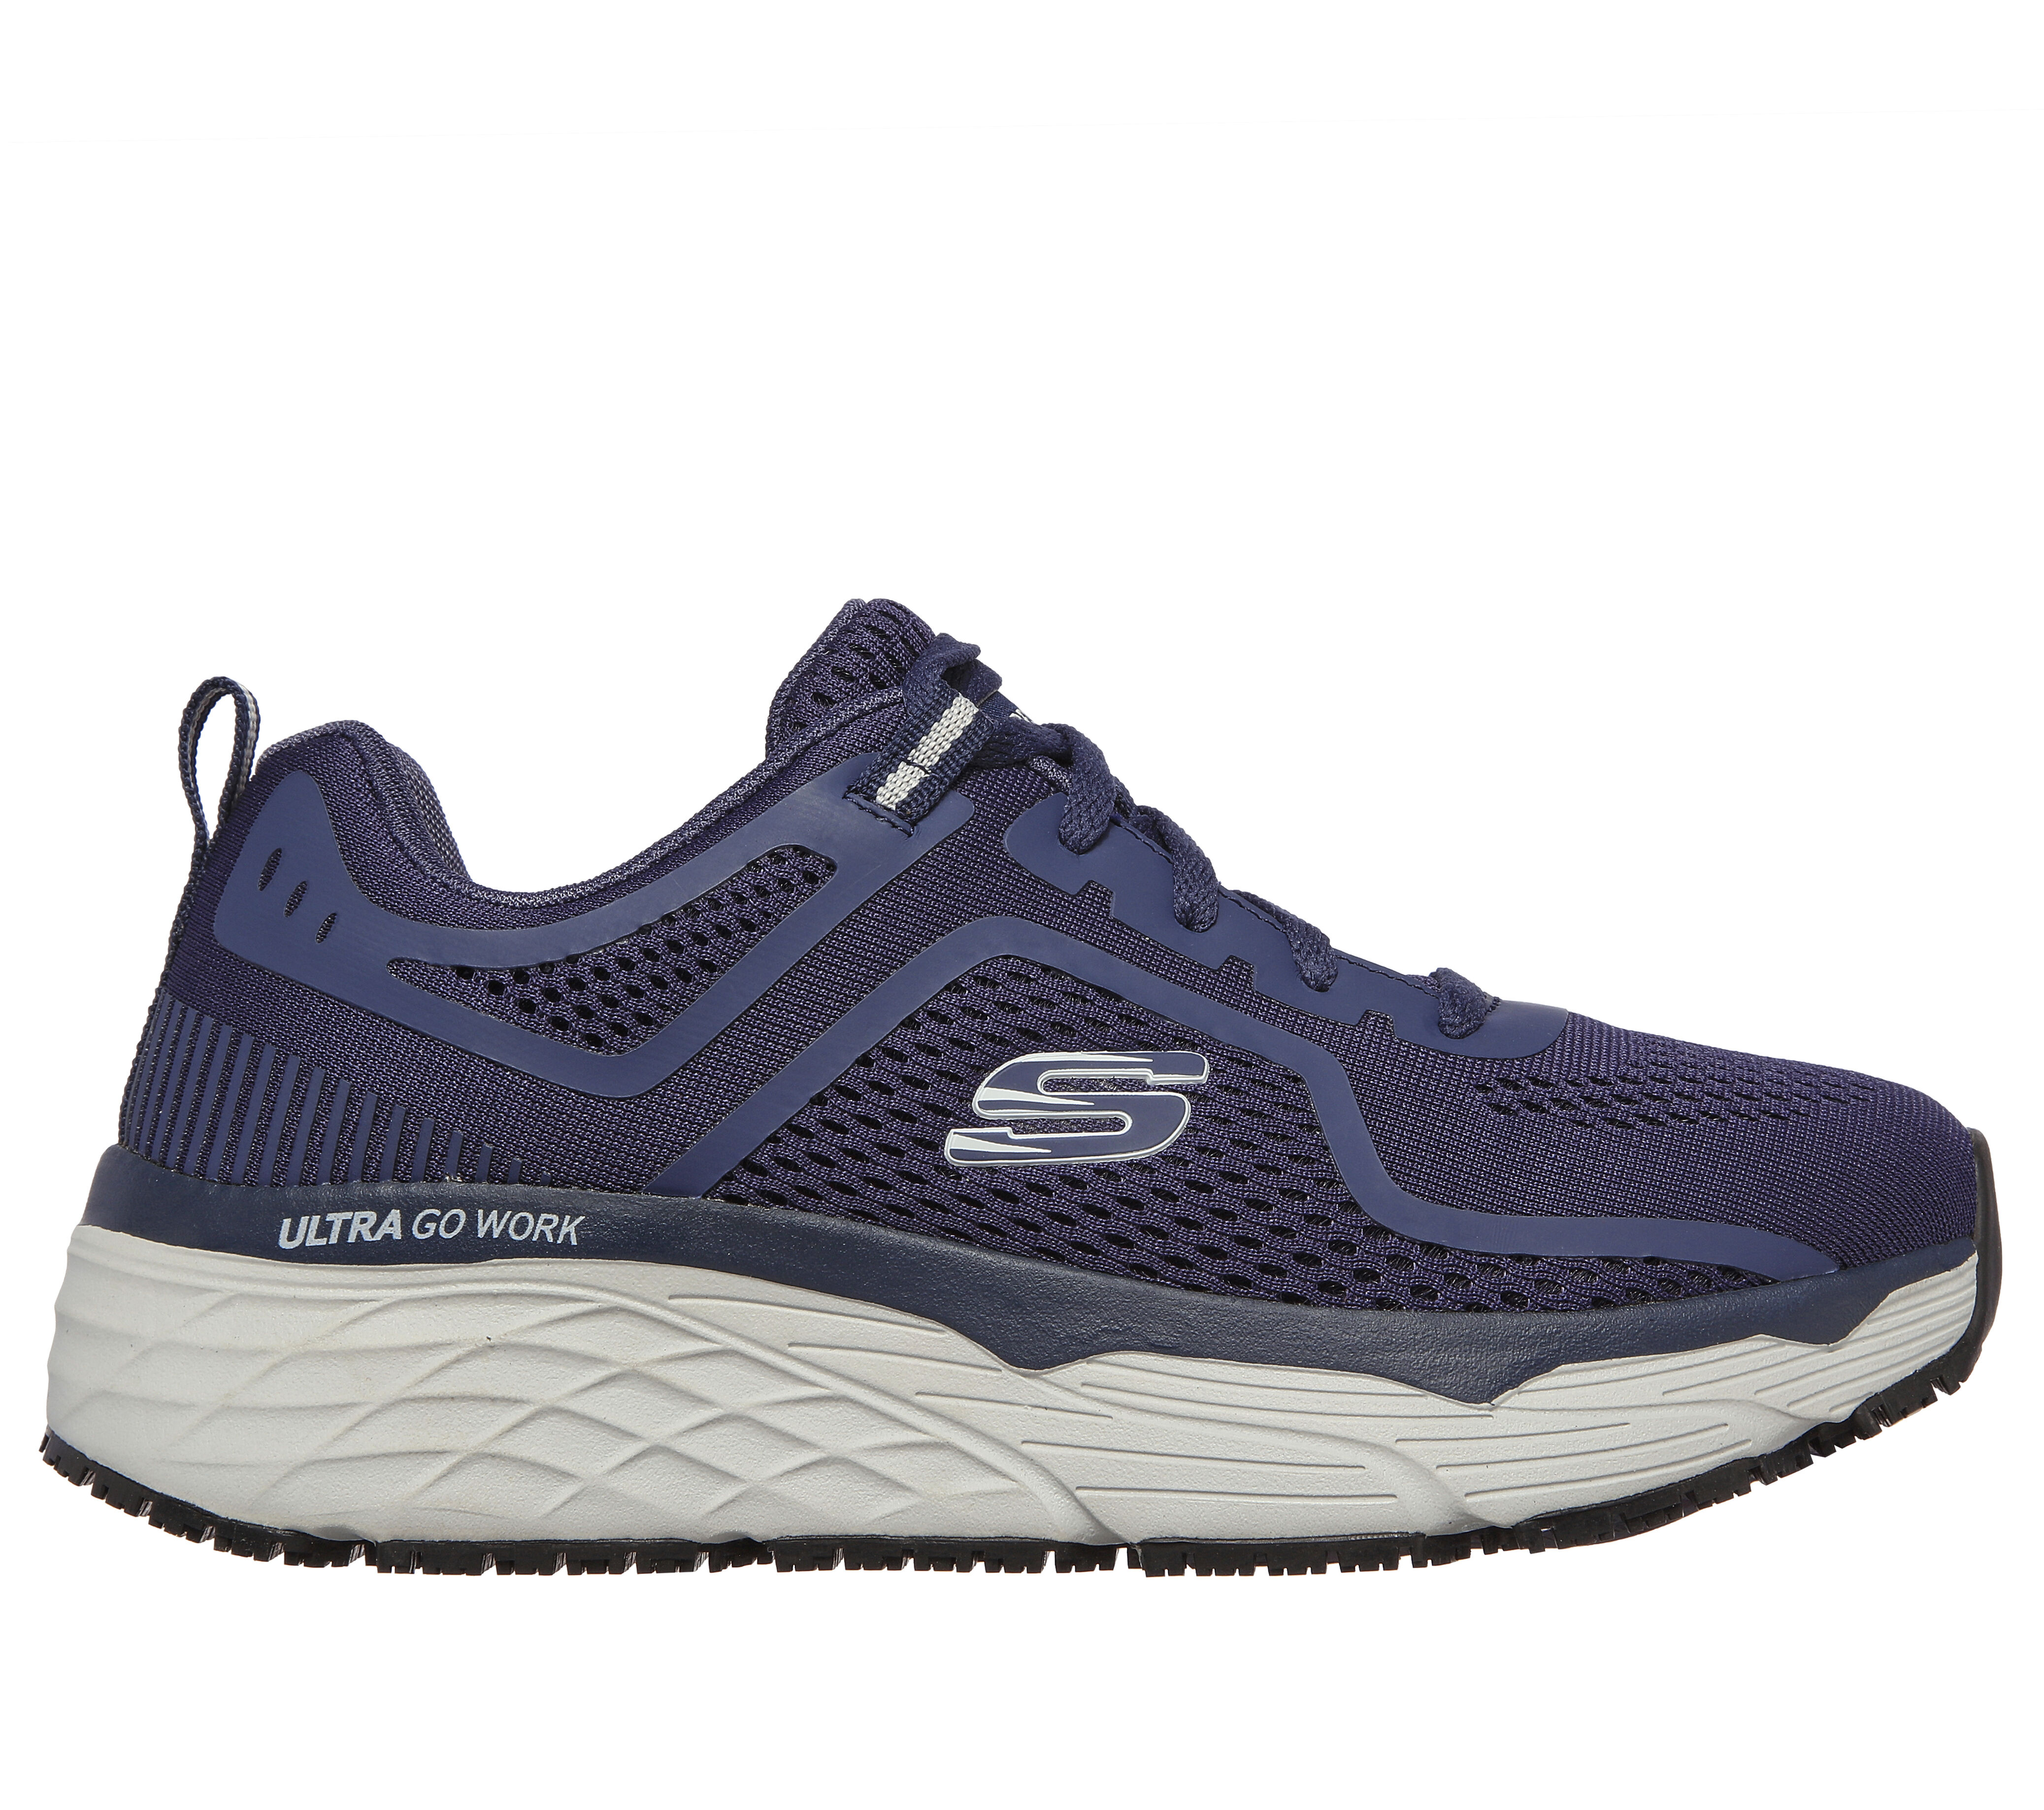 skechers safety shoes womens